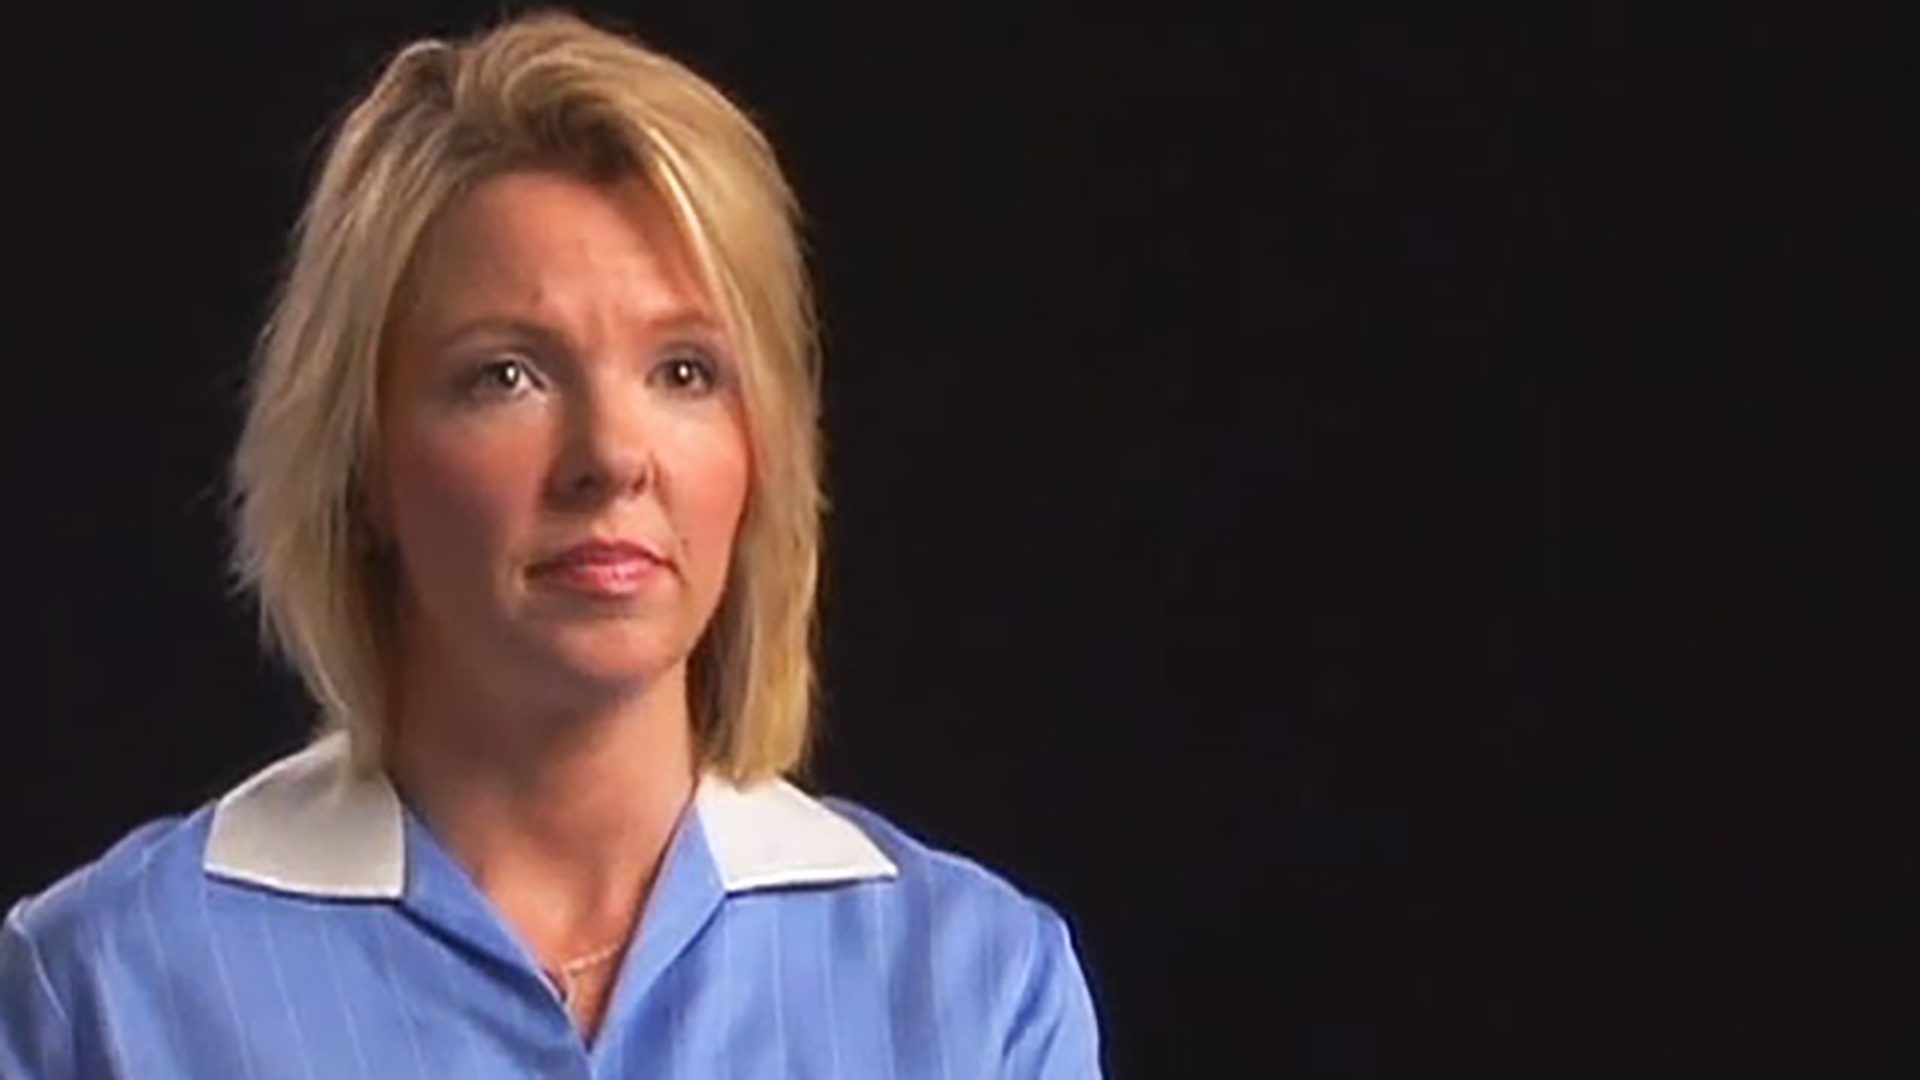 A woman with blonde shoulder-length hair and a light blue collared shirt is interviewed against a black background.